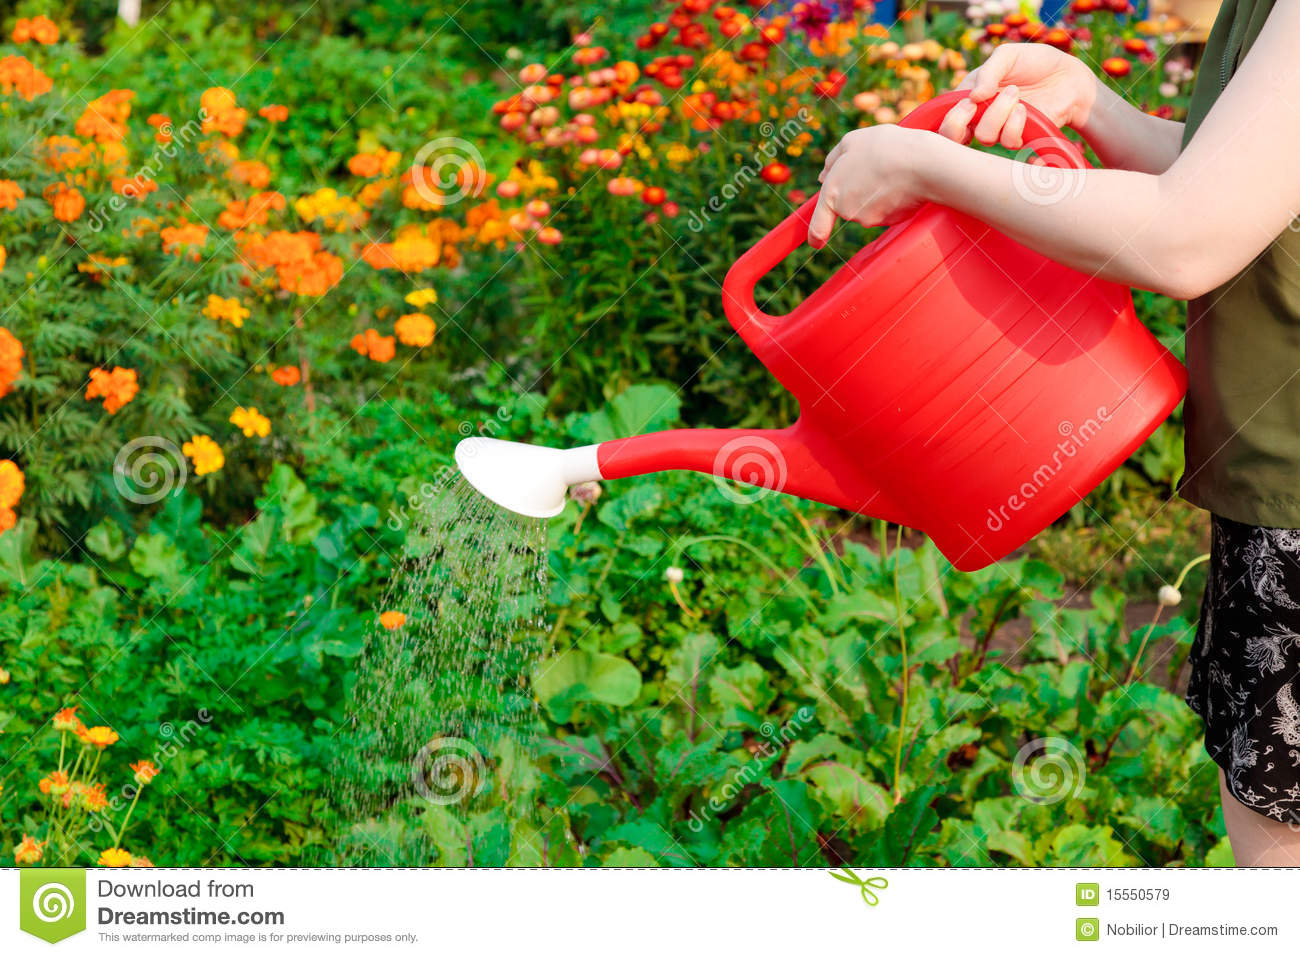 Watering Vegetables Royalty Free Stock Images   Image  15550579